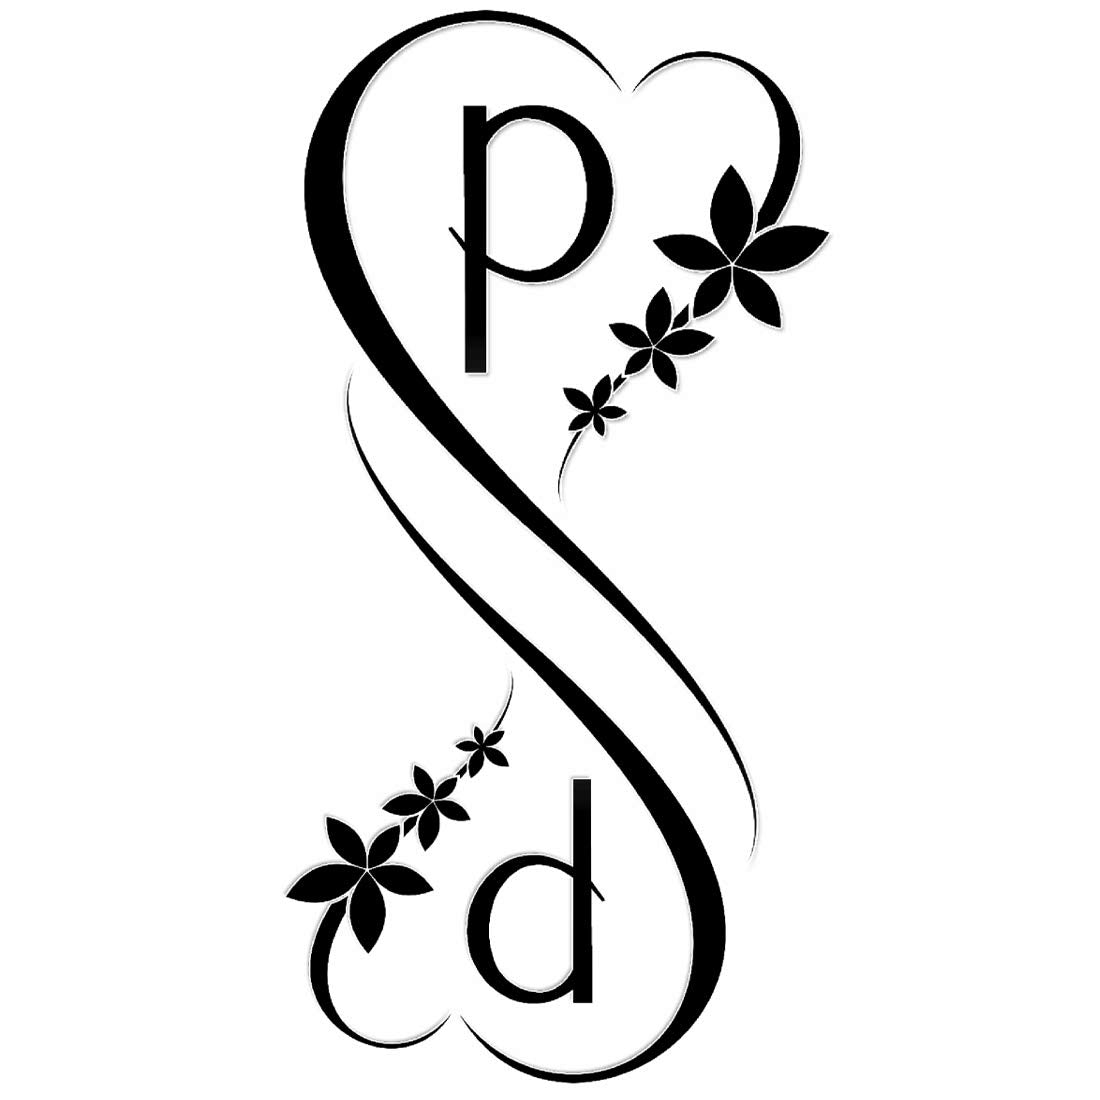 Simple Letter 'P' Tattoos Designs and Ideas | Single Letter Tattoo ideas |  Tattoo Loves | Tattoo Art - YouTube